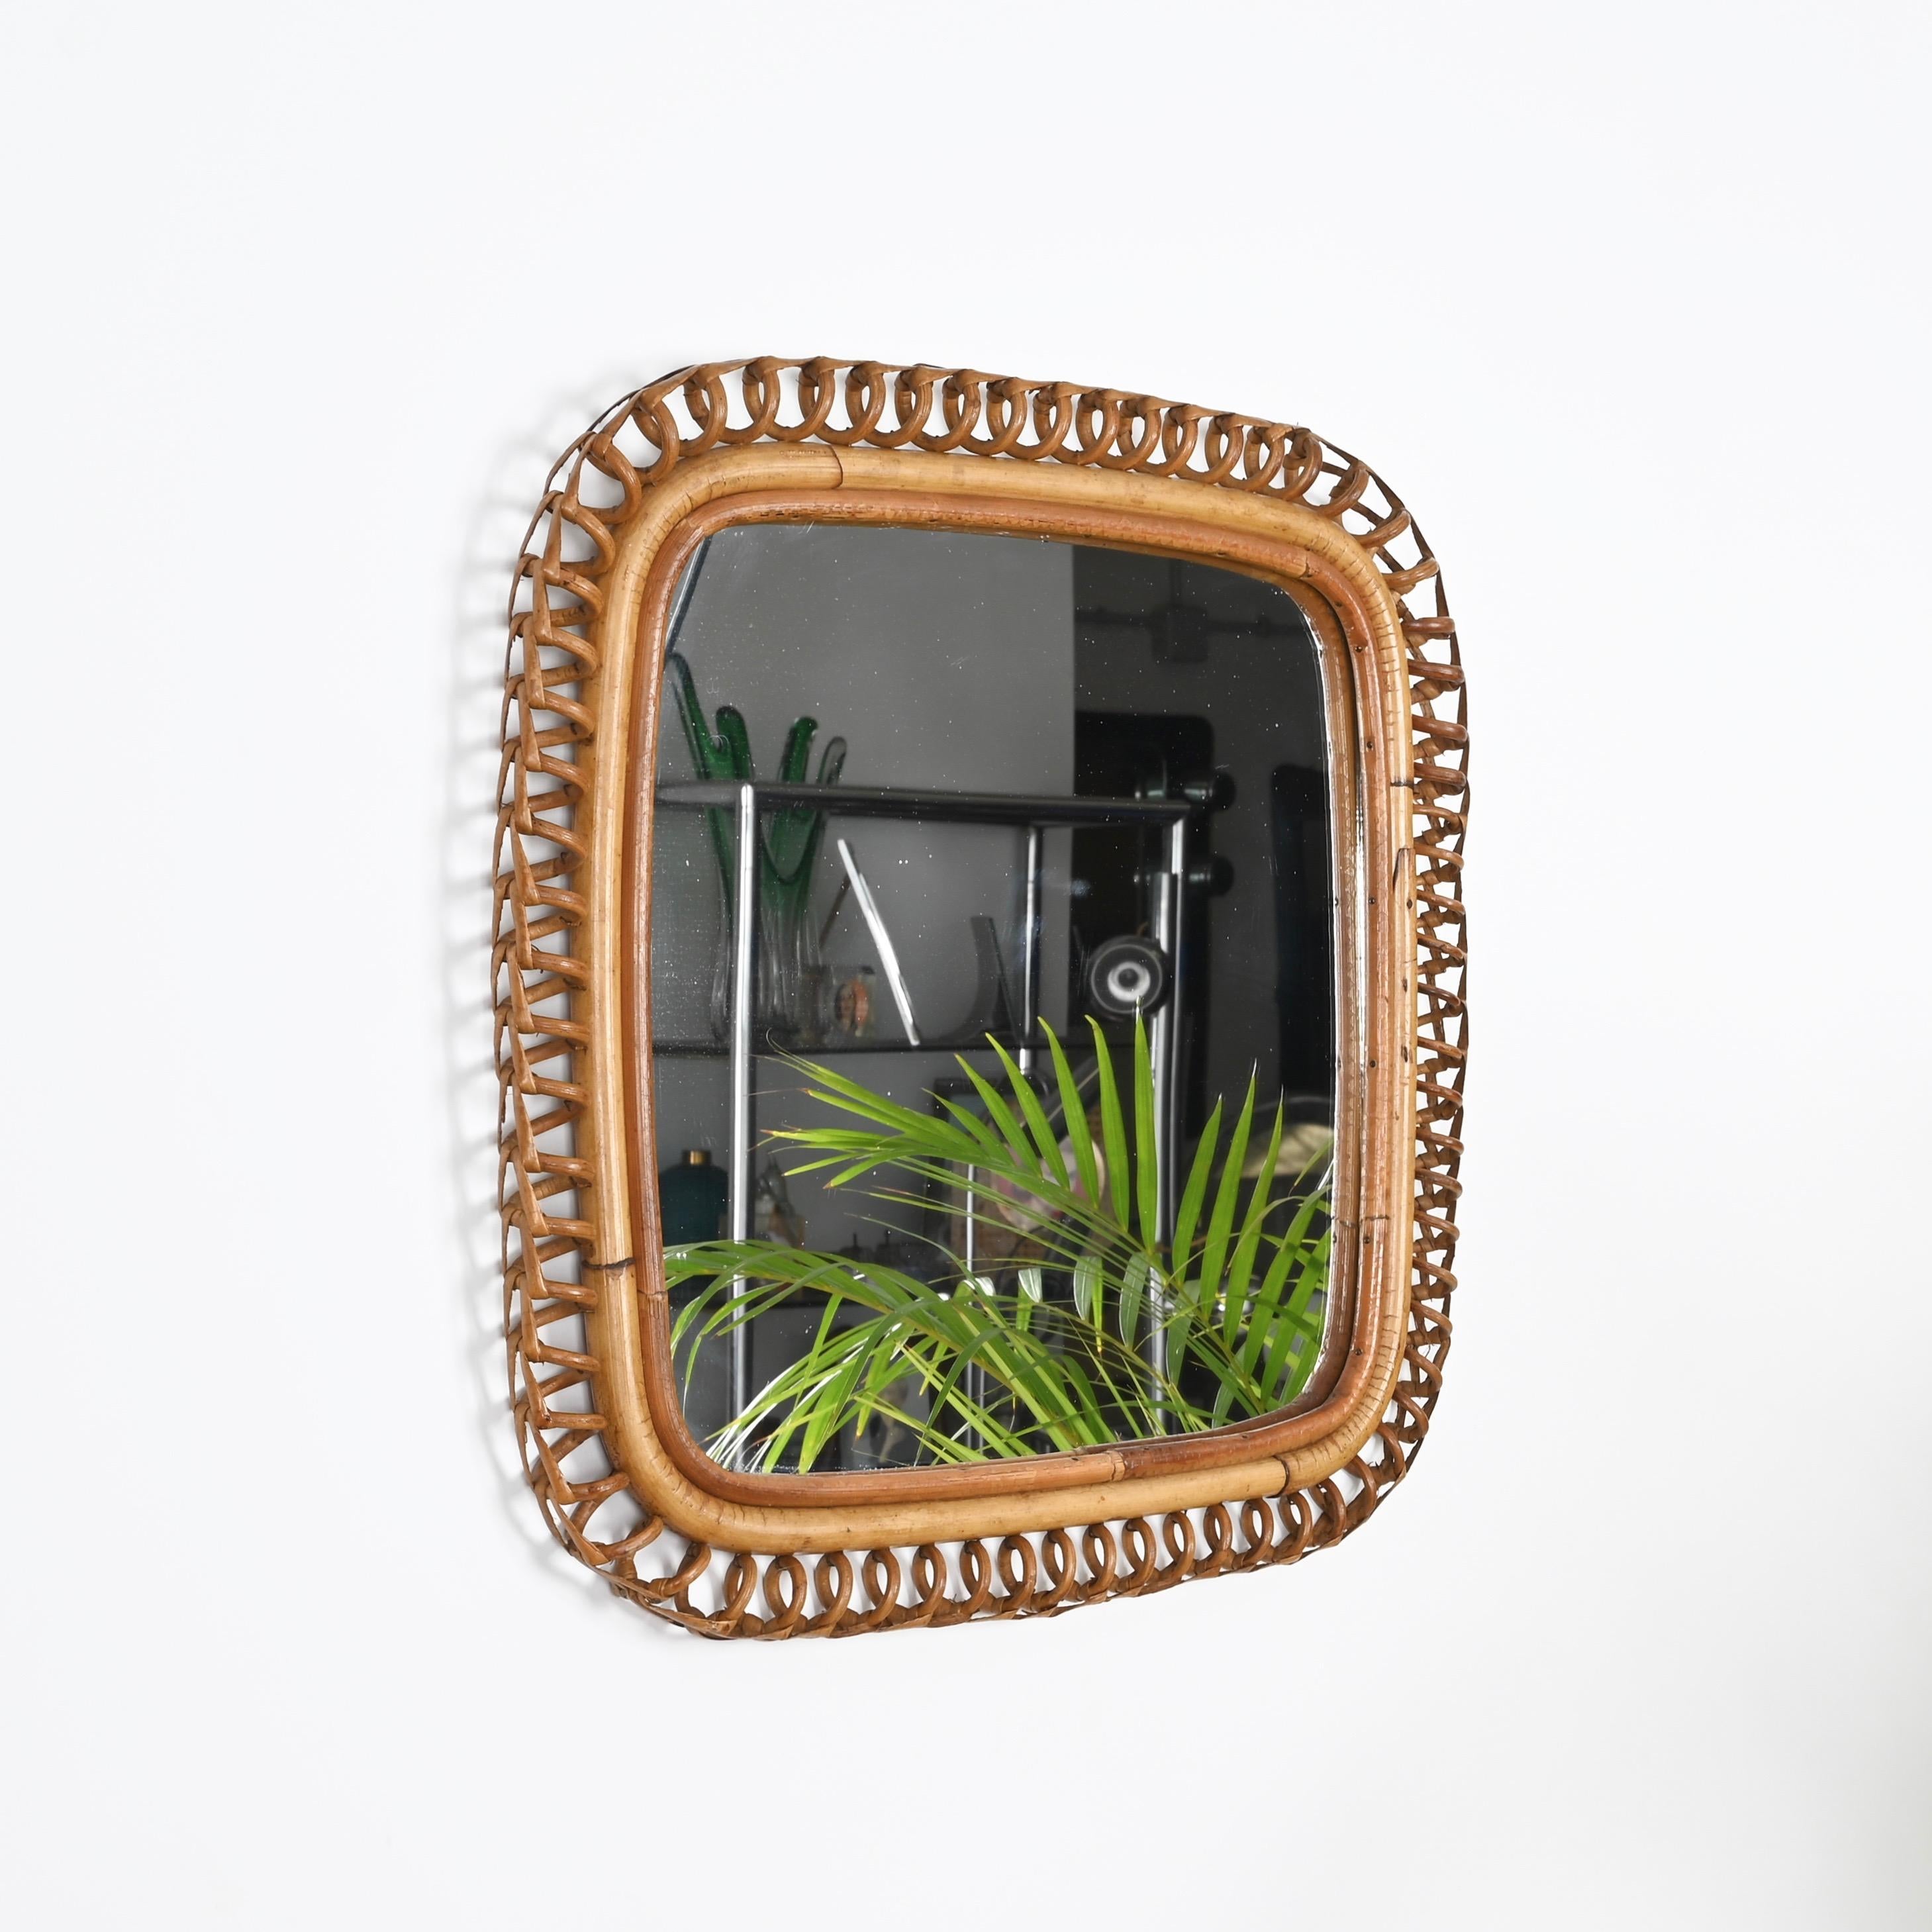 Stunning Mid-CenturyFrench Riviera style square mirror fully made in bamboo, curved rattan and hand-woven wicker. This unique mirror was made in Italy during the 1960s and is attributed to the mastery of Franco Albini.

This lovely mirror is fully